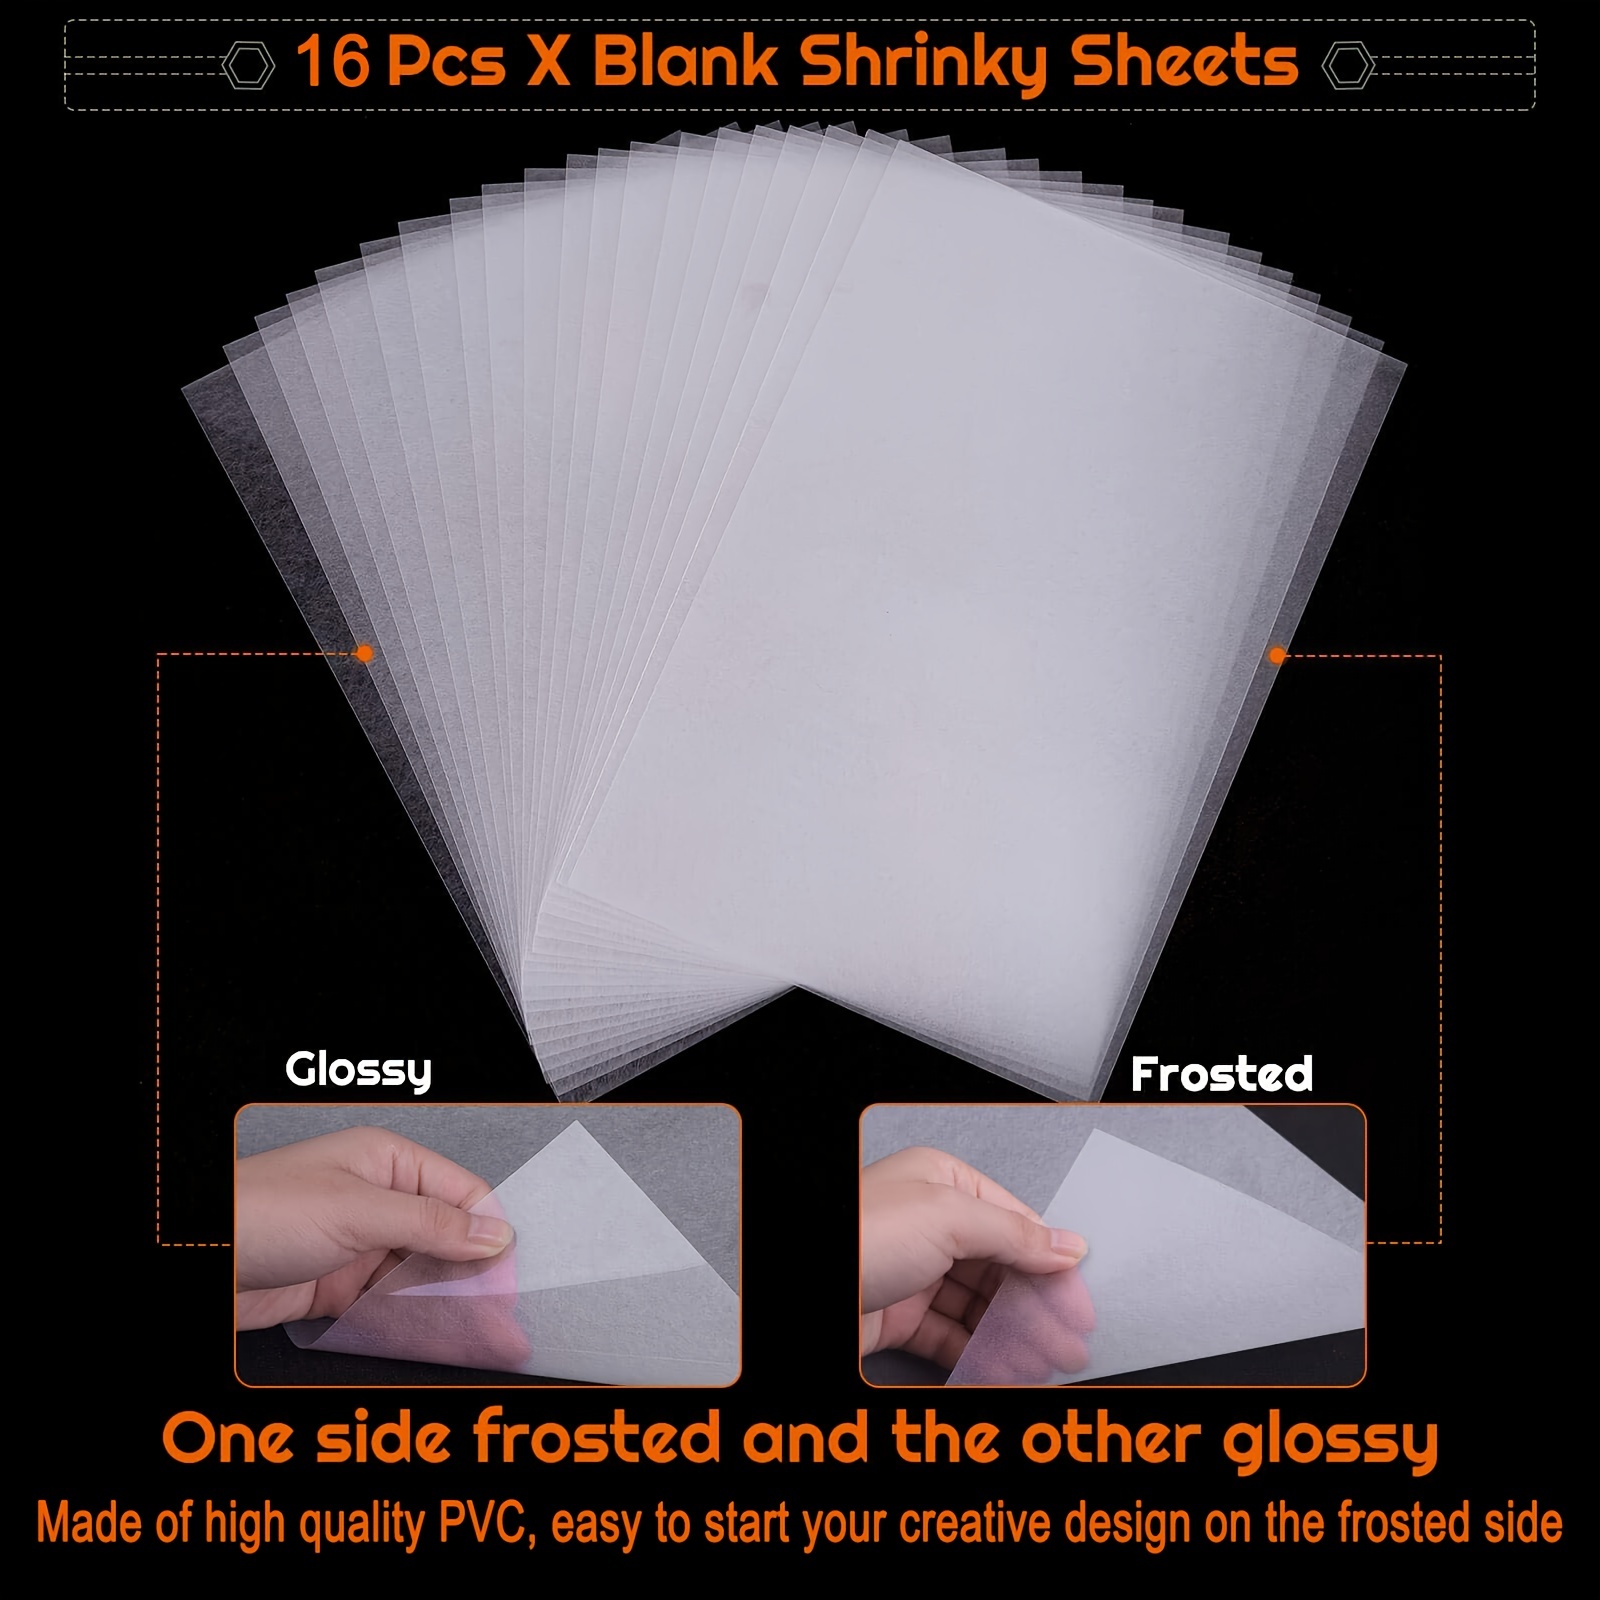 Get started with shrink plastic sheets 